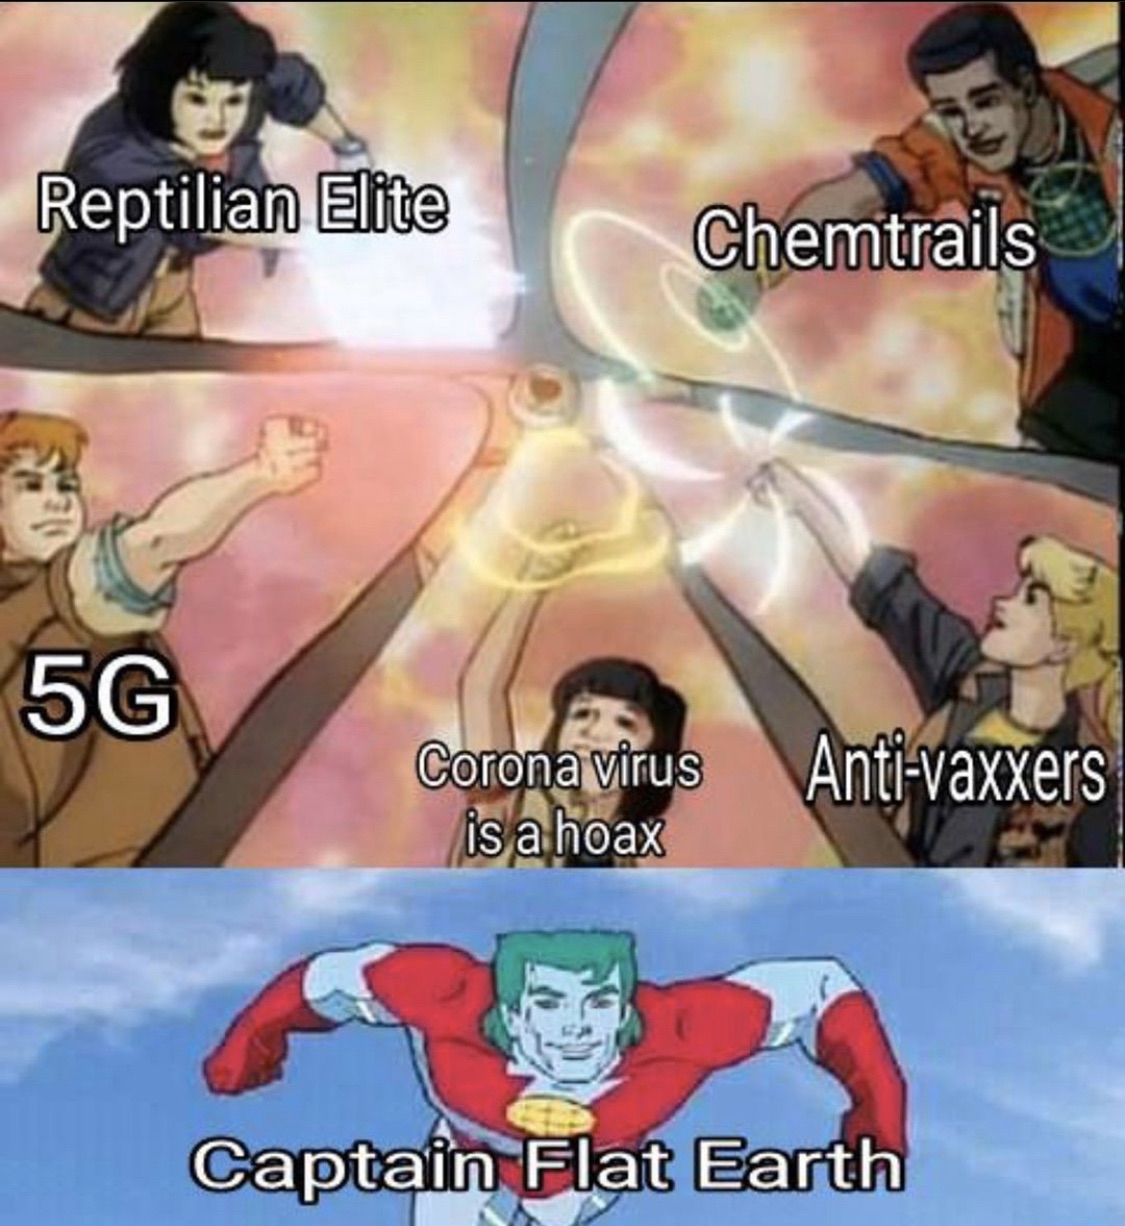 captain planet and the planeteers - Reptilian Elite Chemtrails 5G 50 Corona virus is a hoax Captain Flat Earth